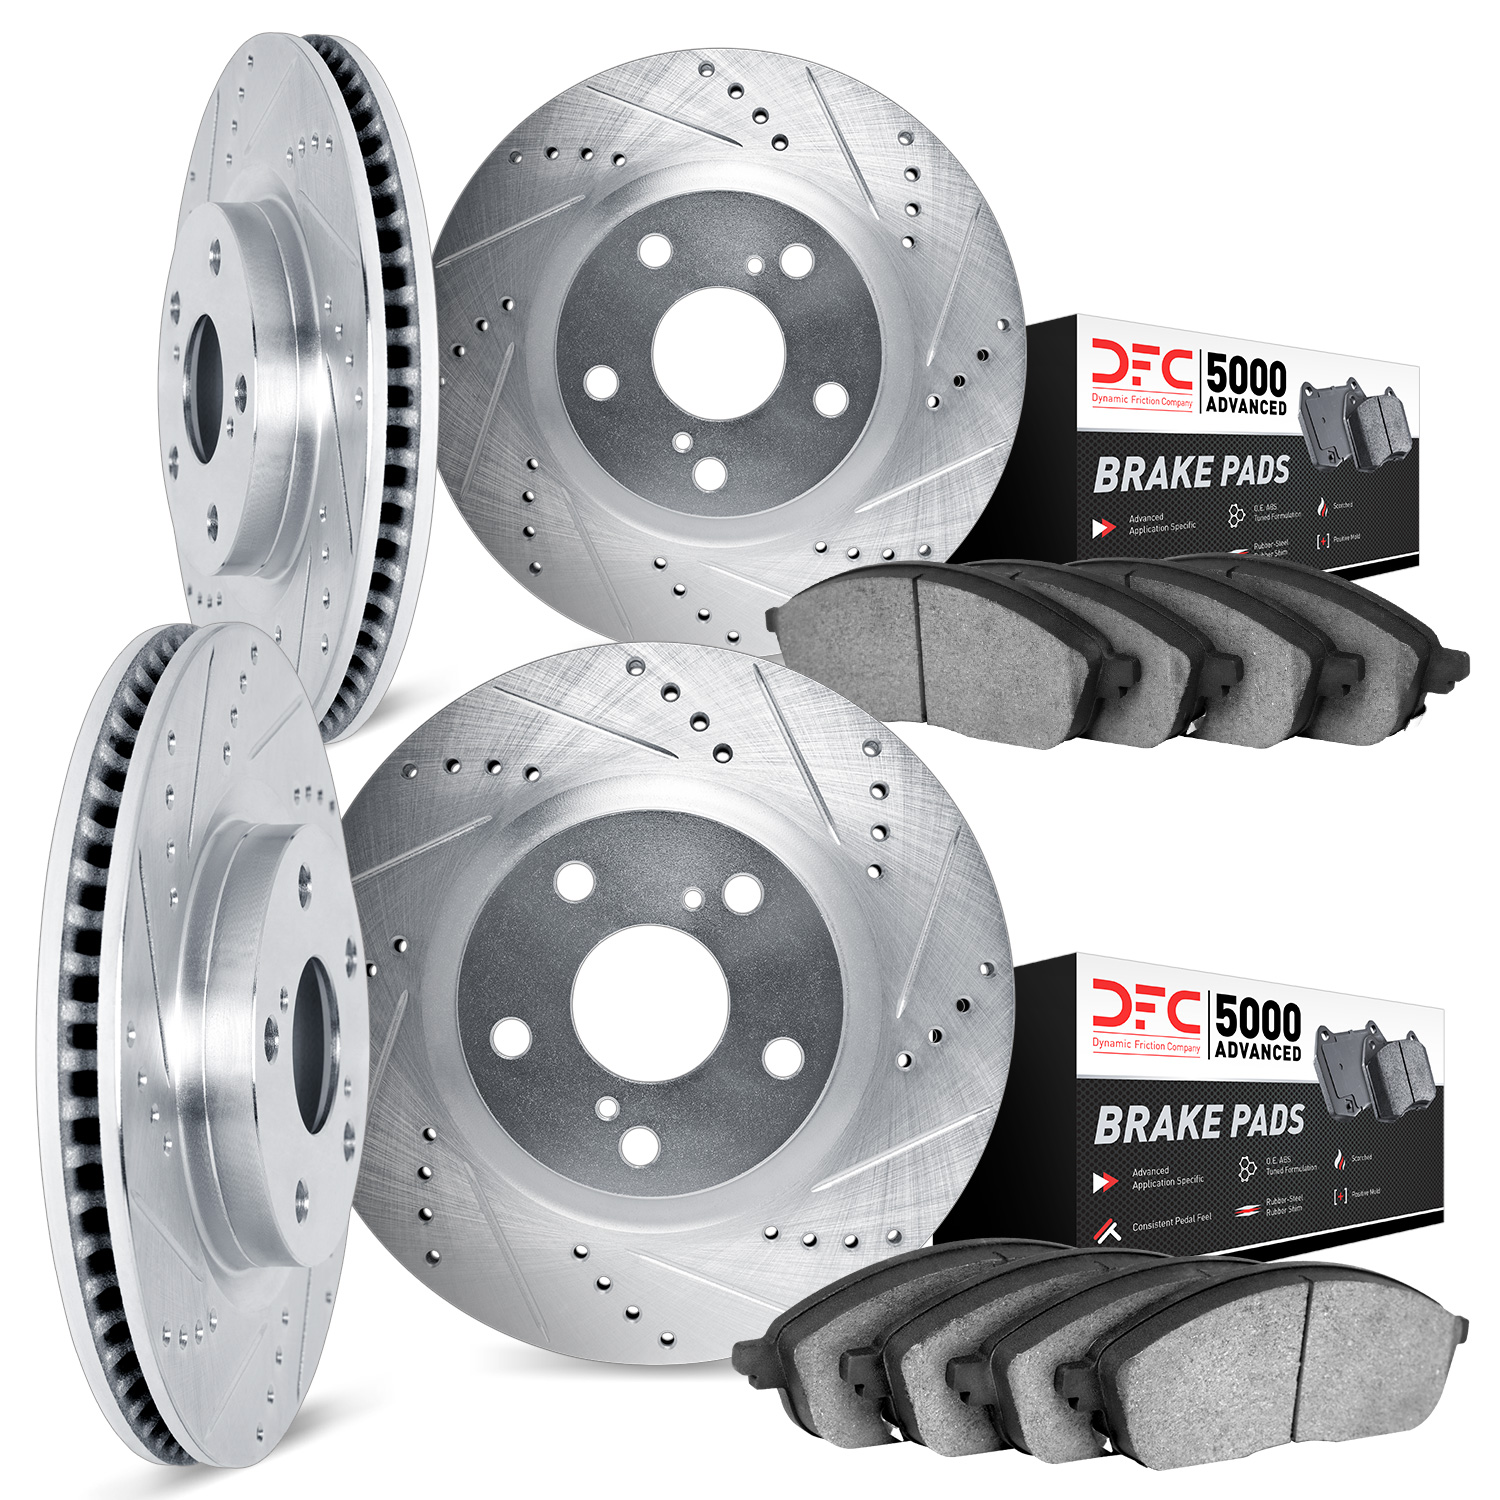 7504-46034 Drilled/Slotted Brake Rotors w/5000 Advanced Brake Pads Kit [Silver], 1997-2009 GM, Position: Front and Rear